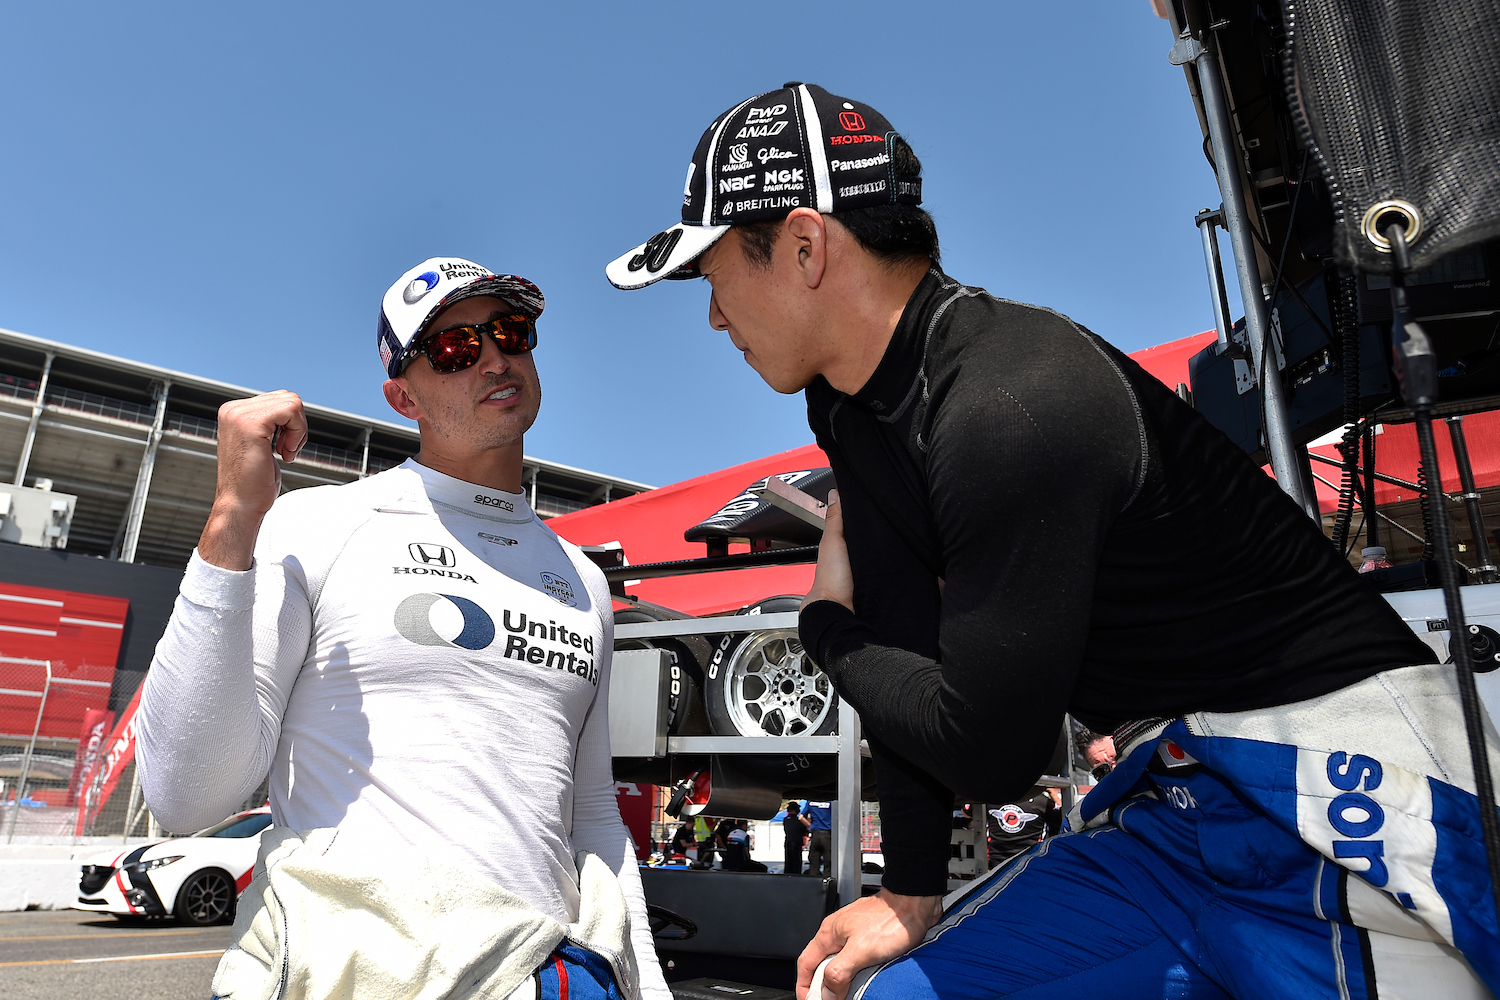 Rahal and Sato confident of competitive showing at Pocono Raceway ...